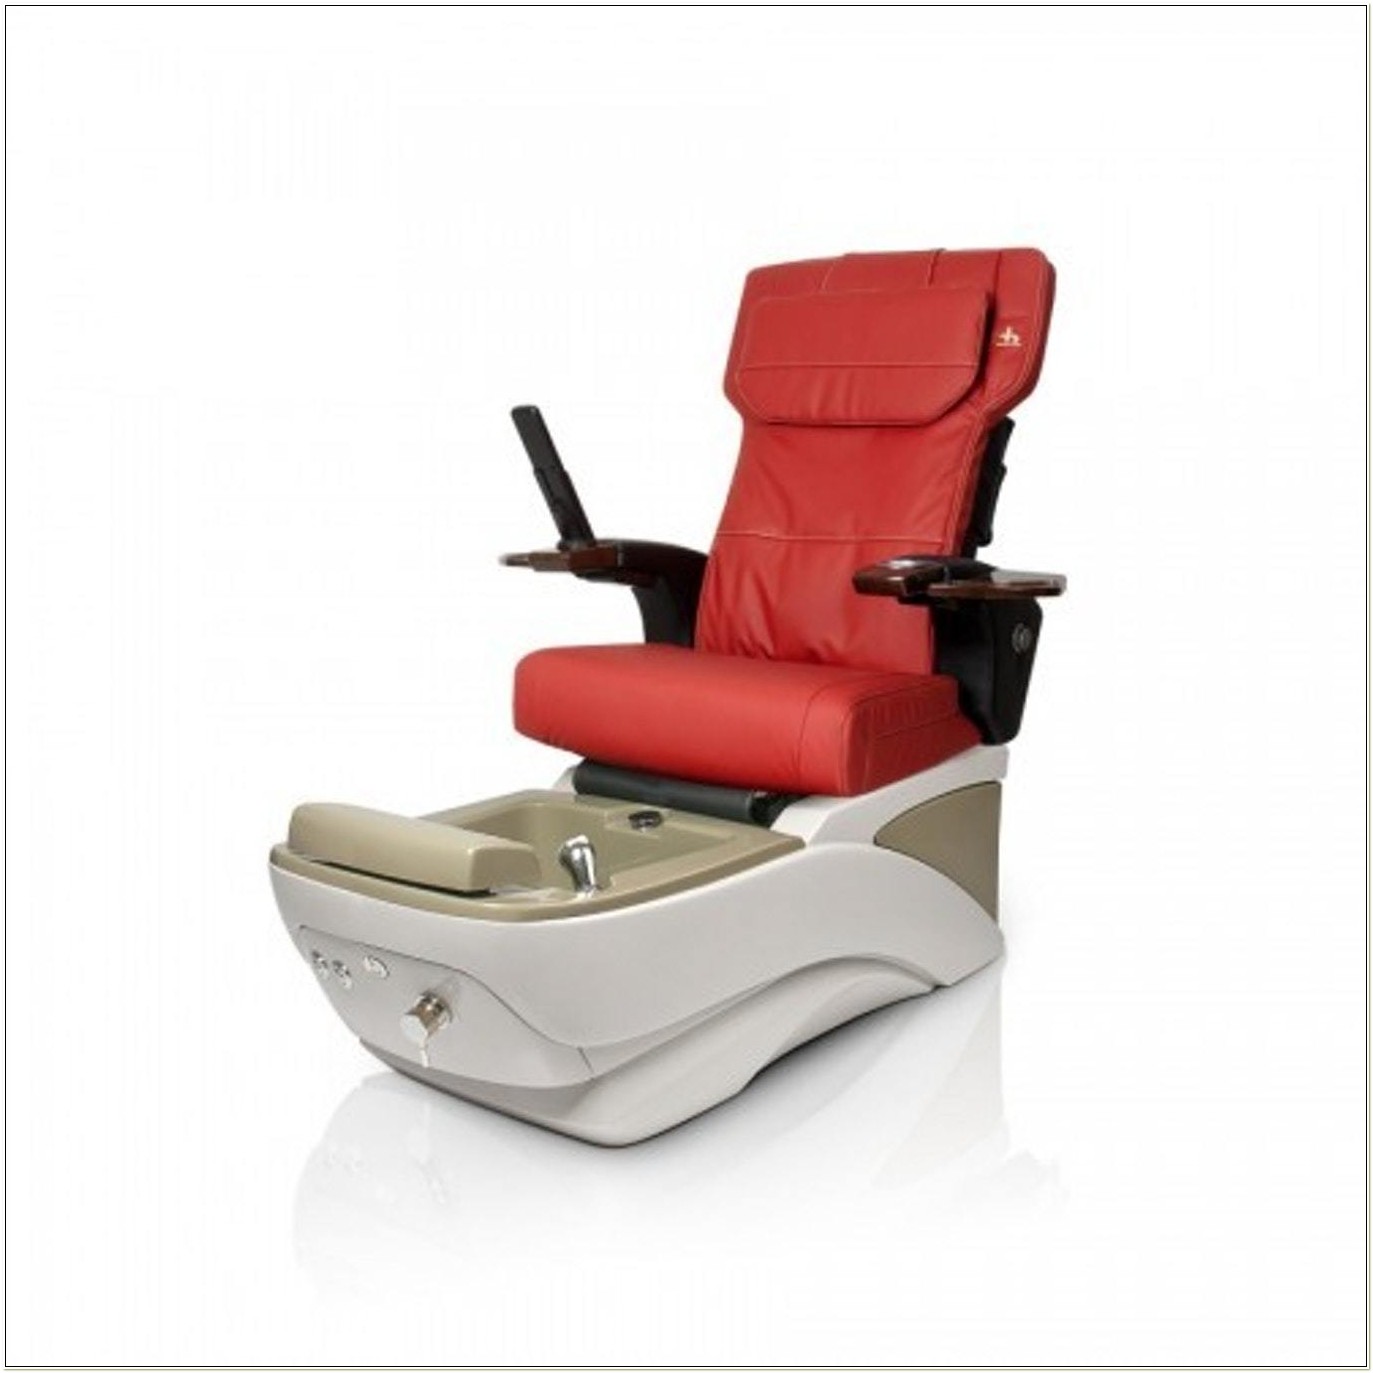 Ijoy 100 Massage Chair Cover - Chairs : Home Decorating Ideas #DQ2OXX0wV0